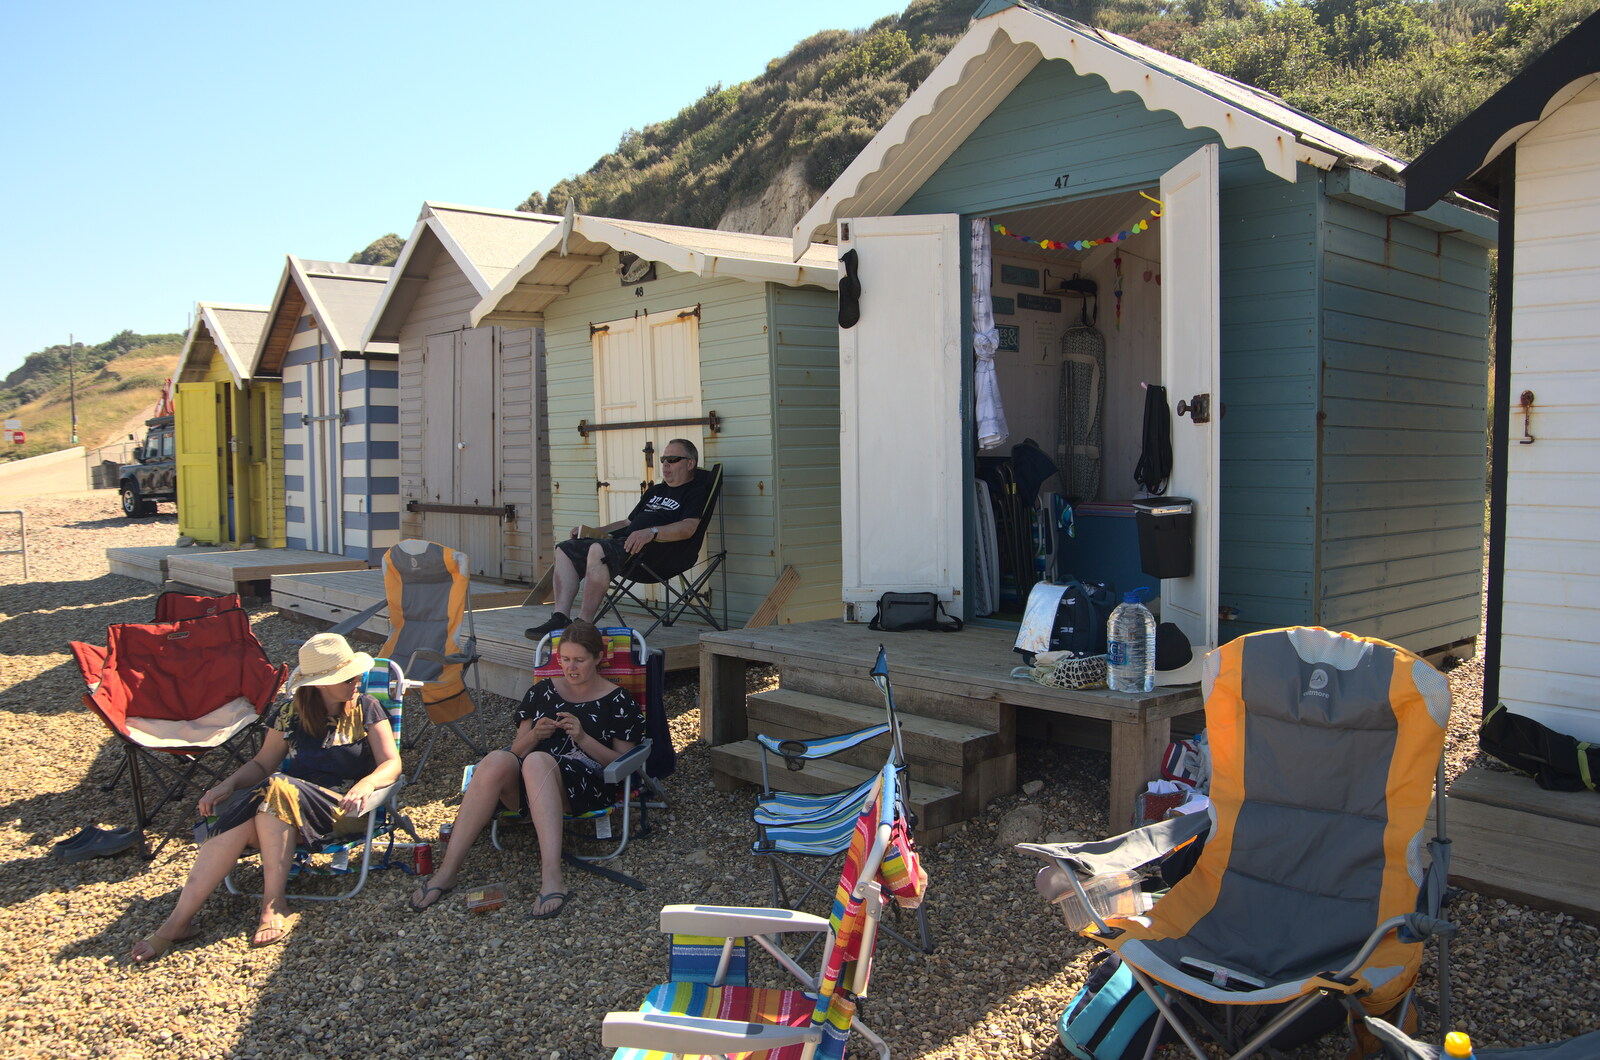 Life with a beach hut from Camping at Forest Park, Cromer, Norfolk - 12th August 2022